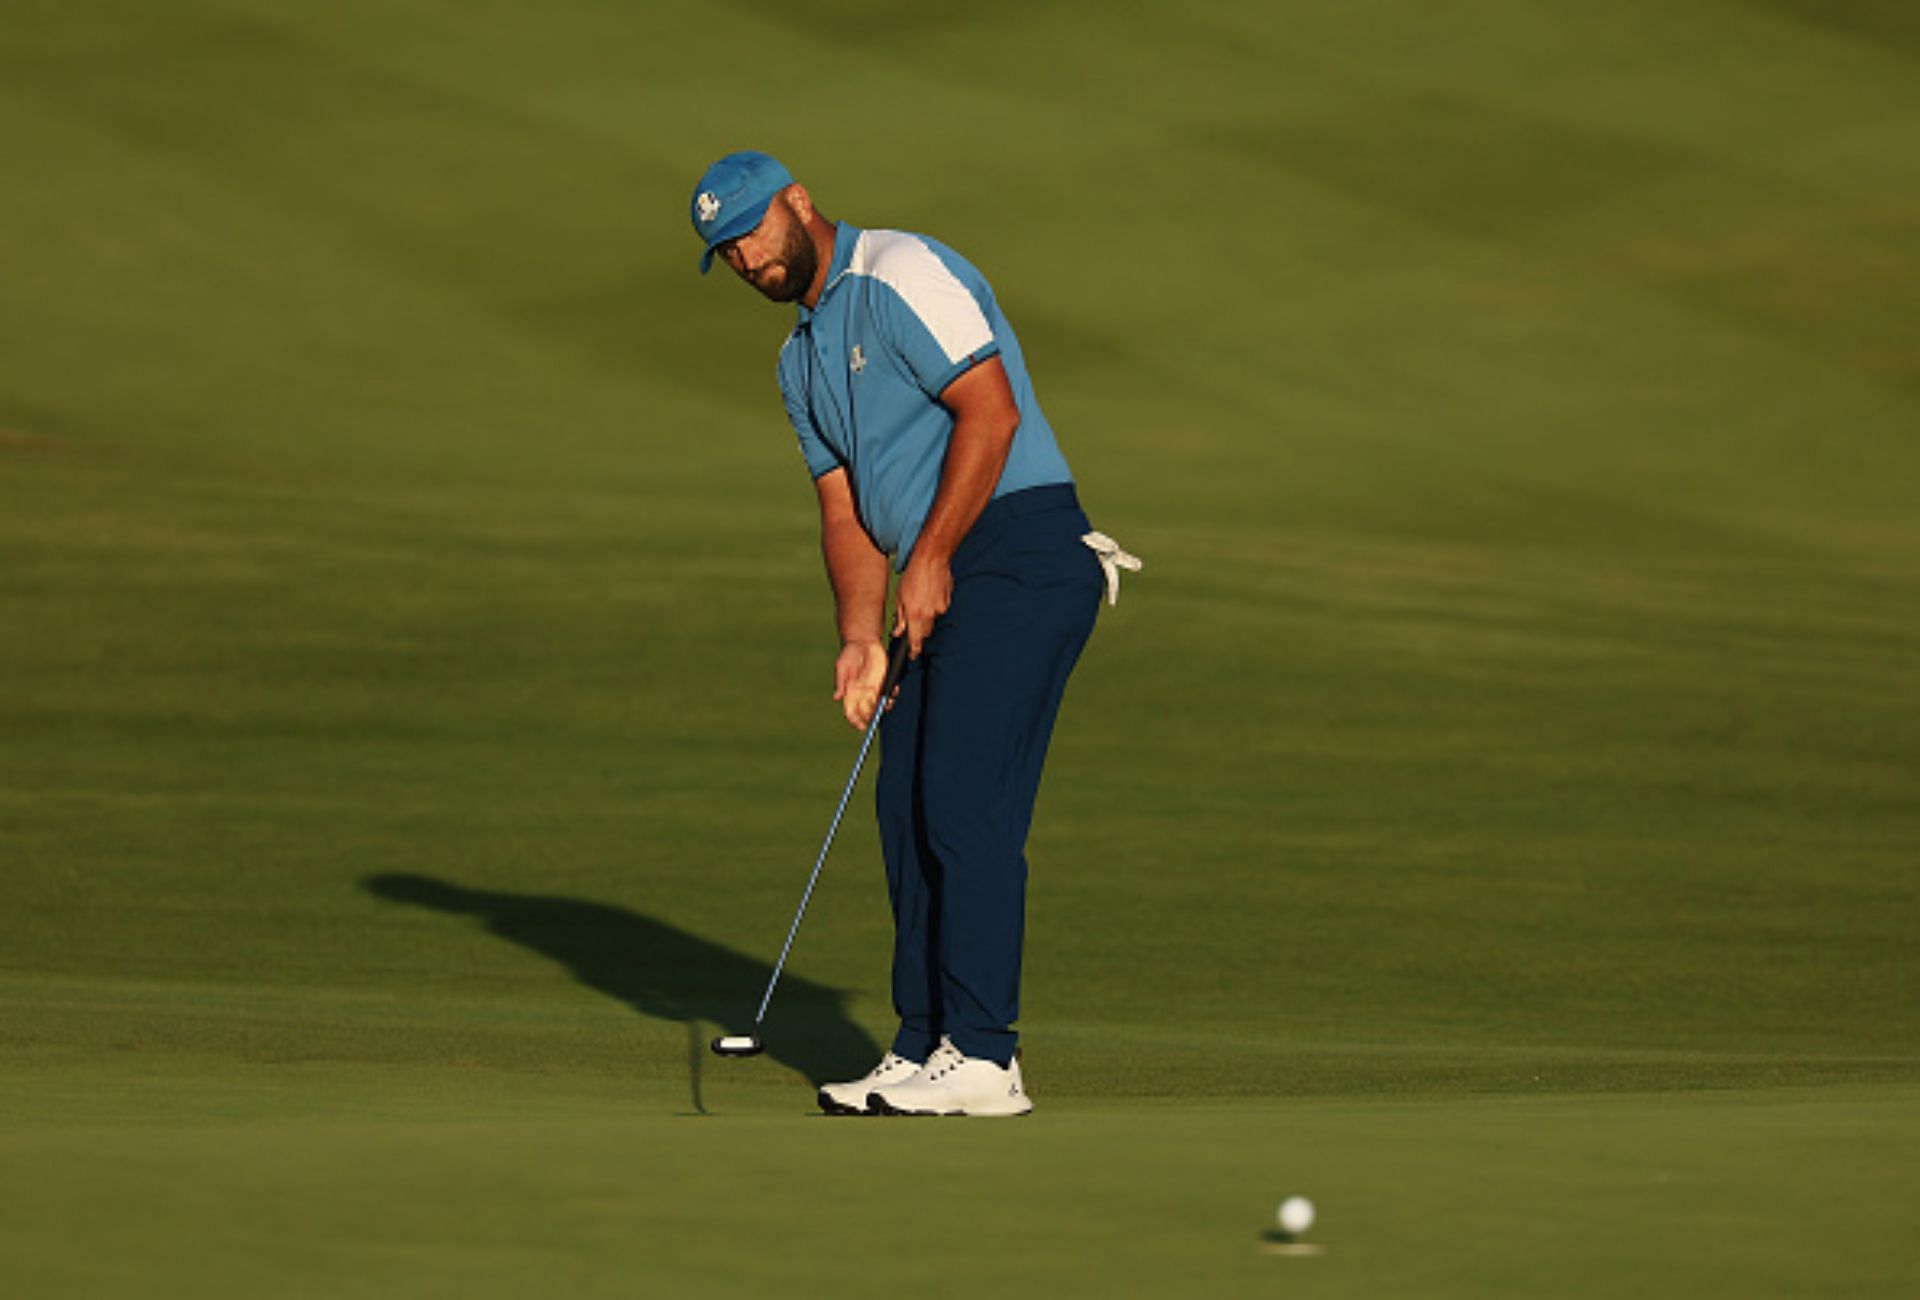 Jon Rahm putting on the 18th hole, Friday four-balls, 2023 Ryder Cup (Image via Getty).